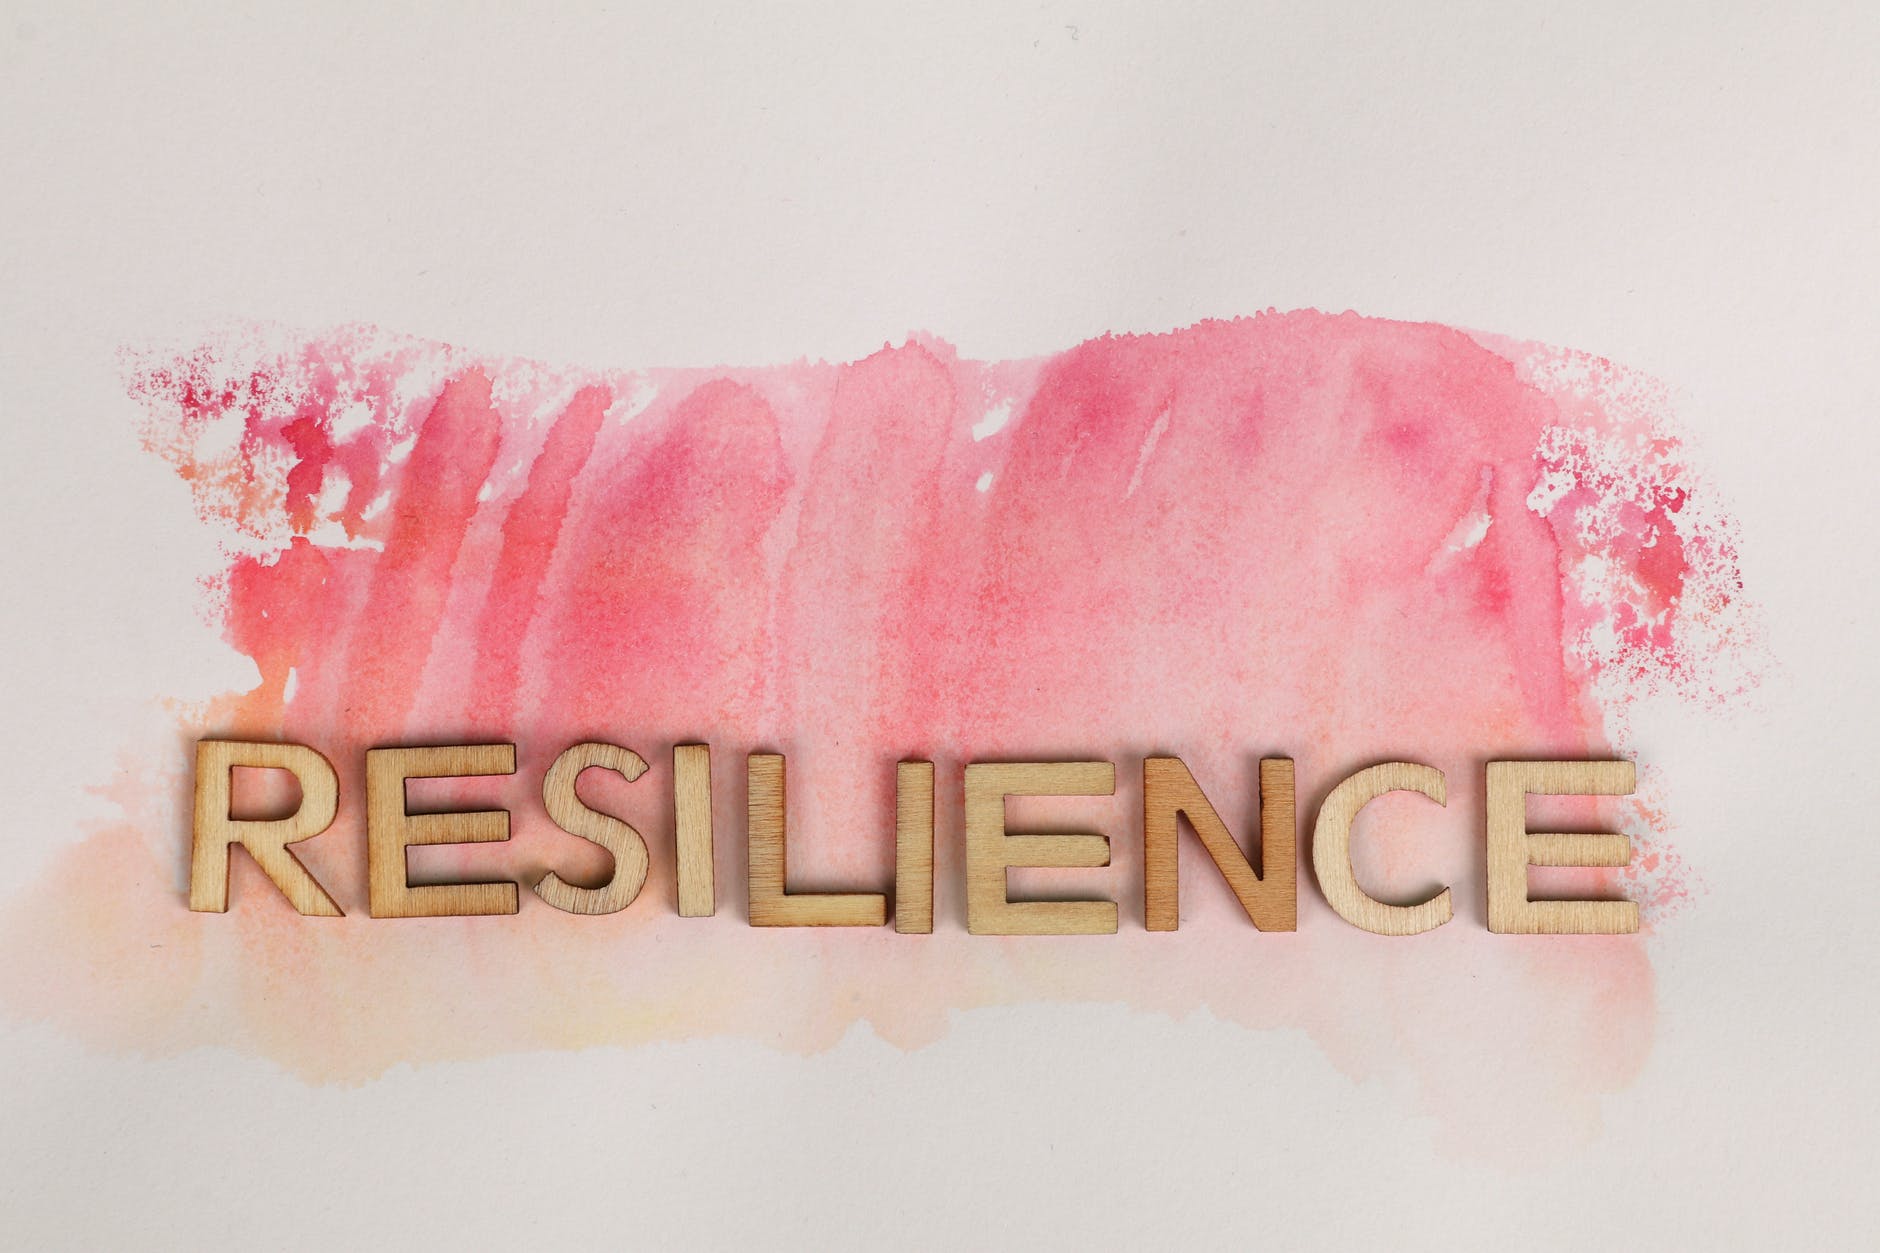 Resilience = Re+Silence